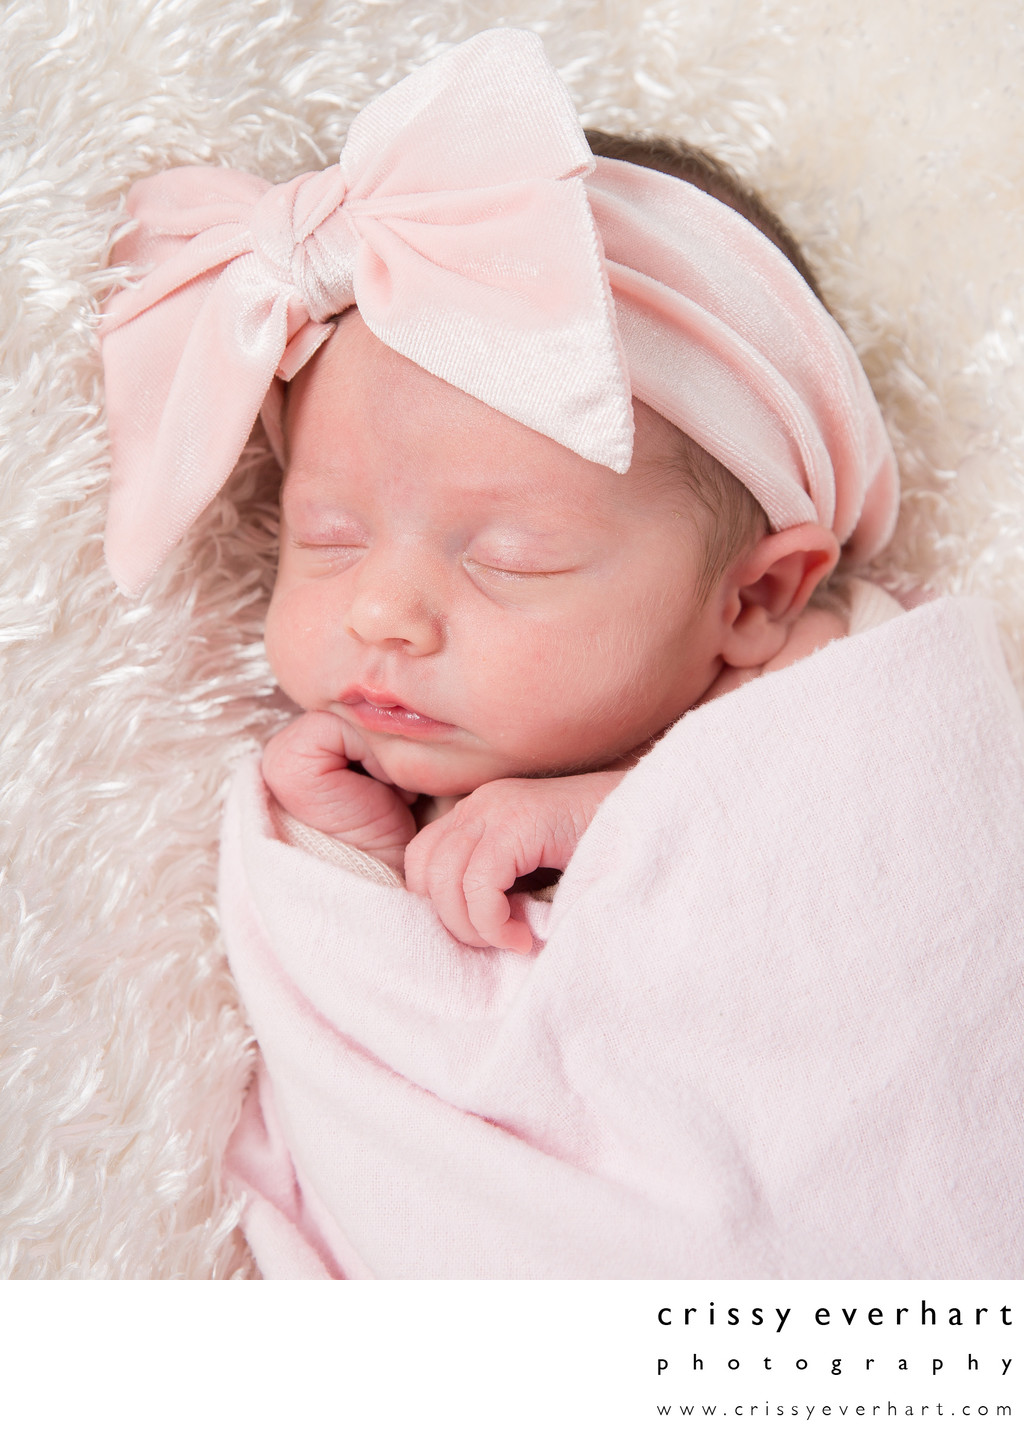 Sleeping Baby Girl in Pink Swaddle with Big Bow 